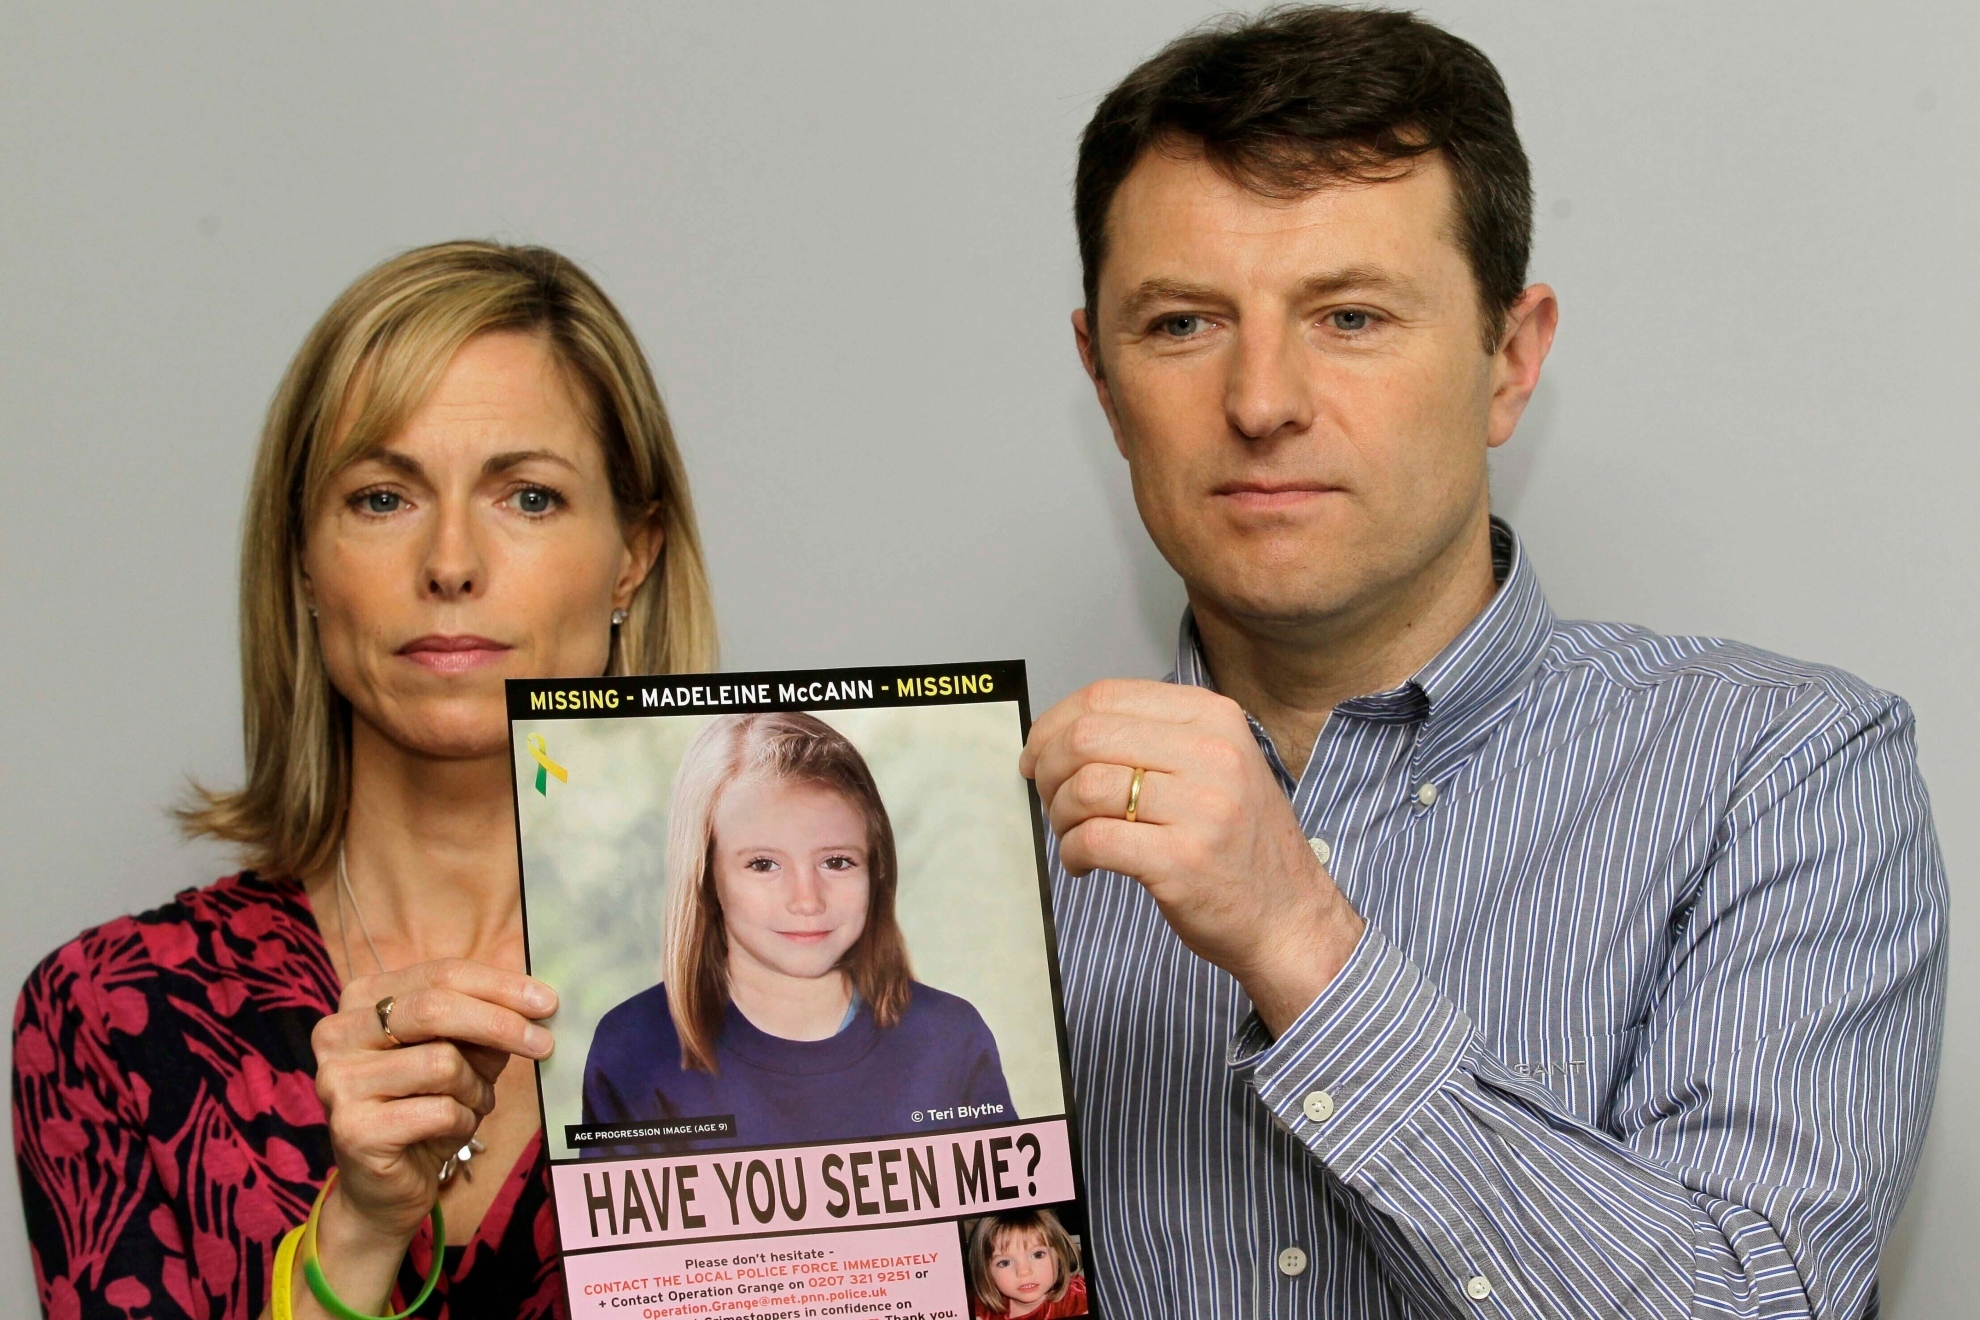 German prosecutors admit investigation will take longer, leaving McCann family in agony after 14 years of searching